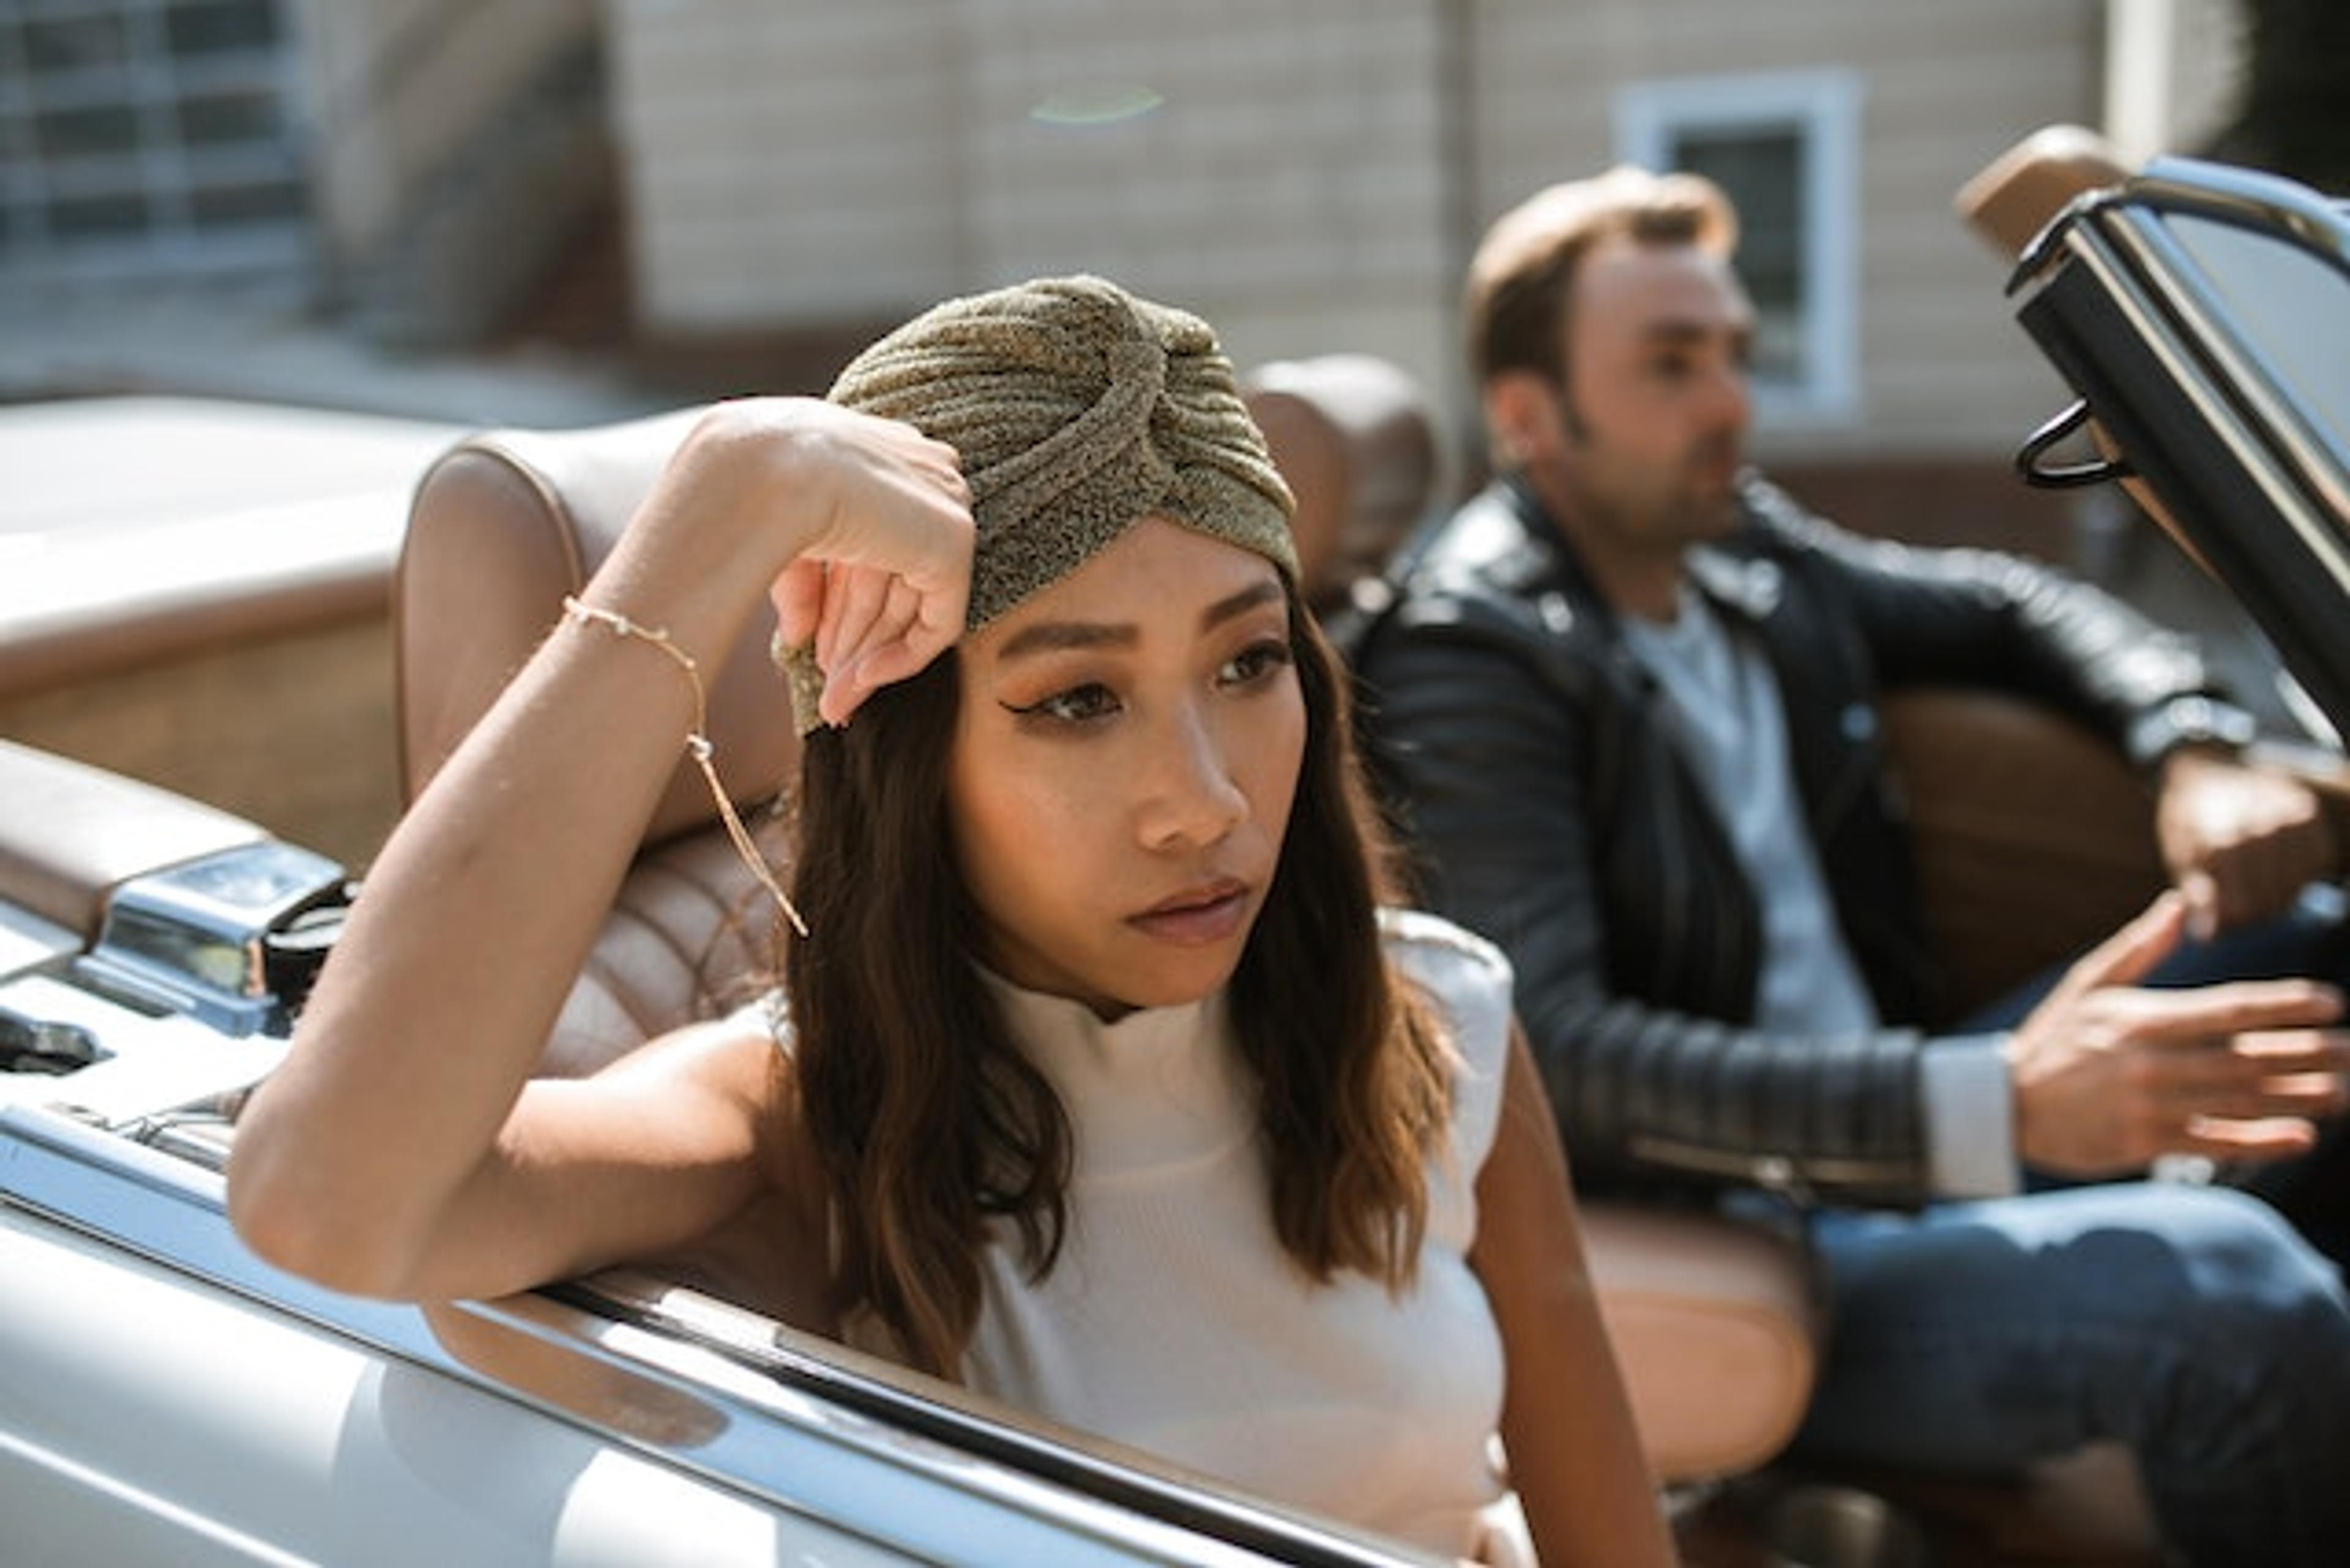 A woman sitting in a convertible car with a man in the back seat, symbolizing a misunderstanding in relationships.